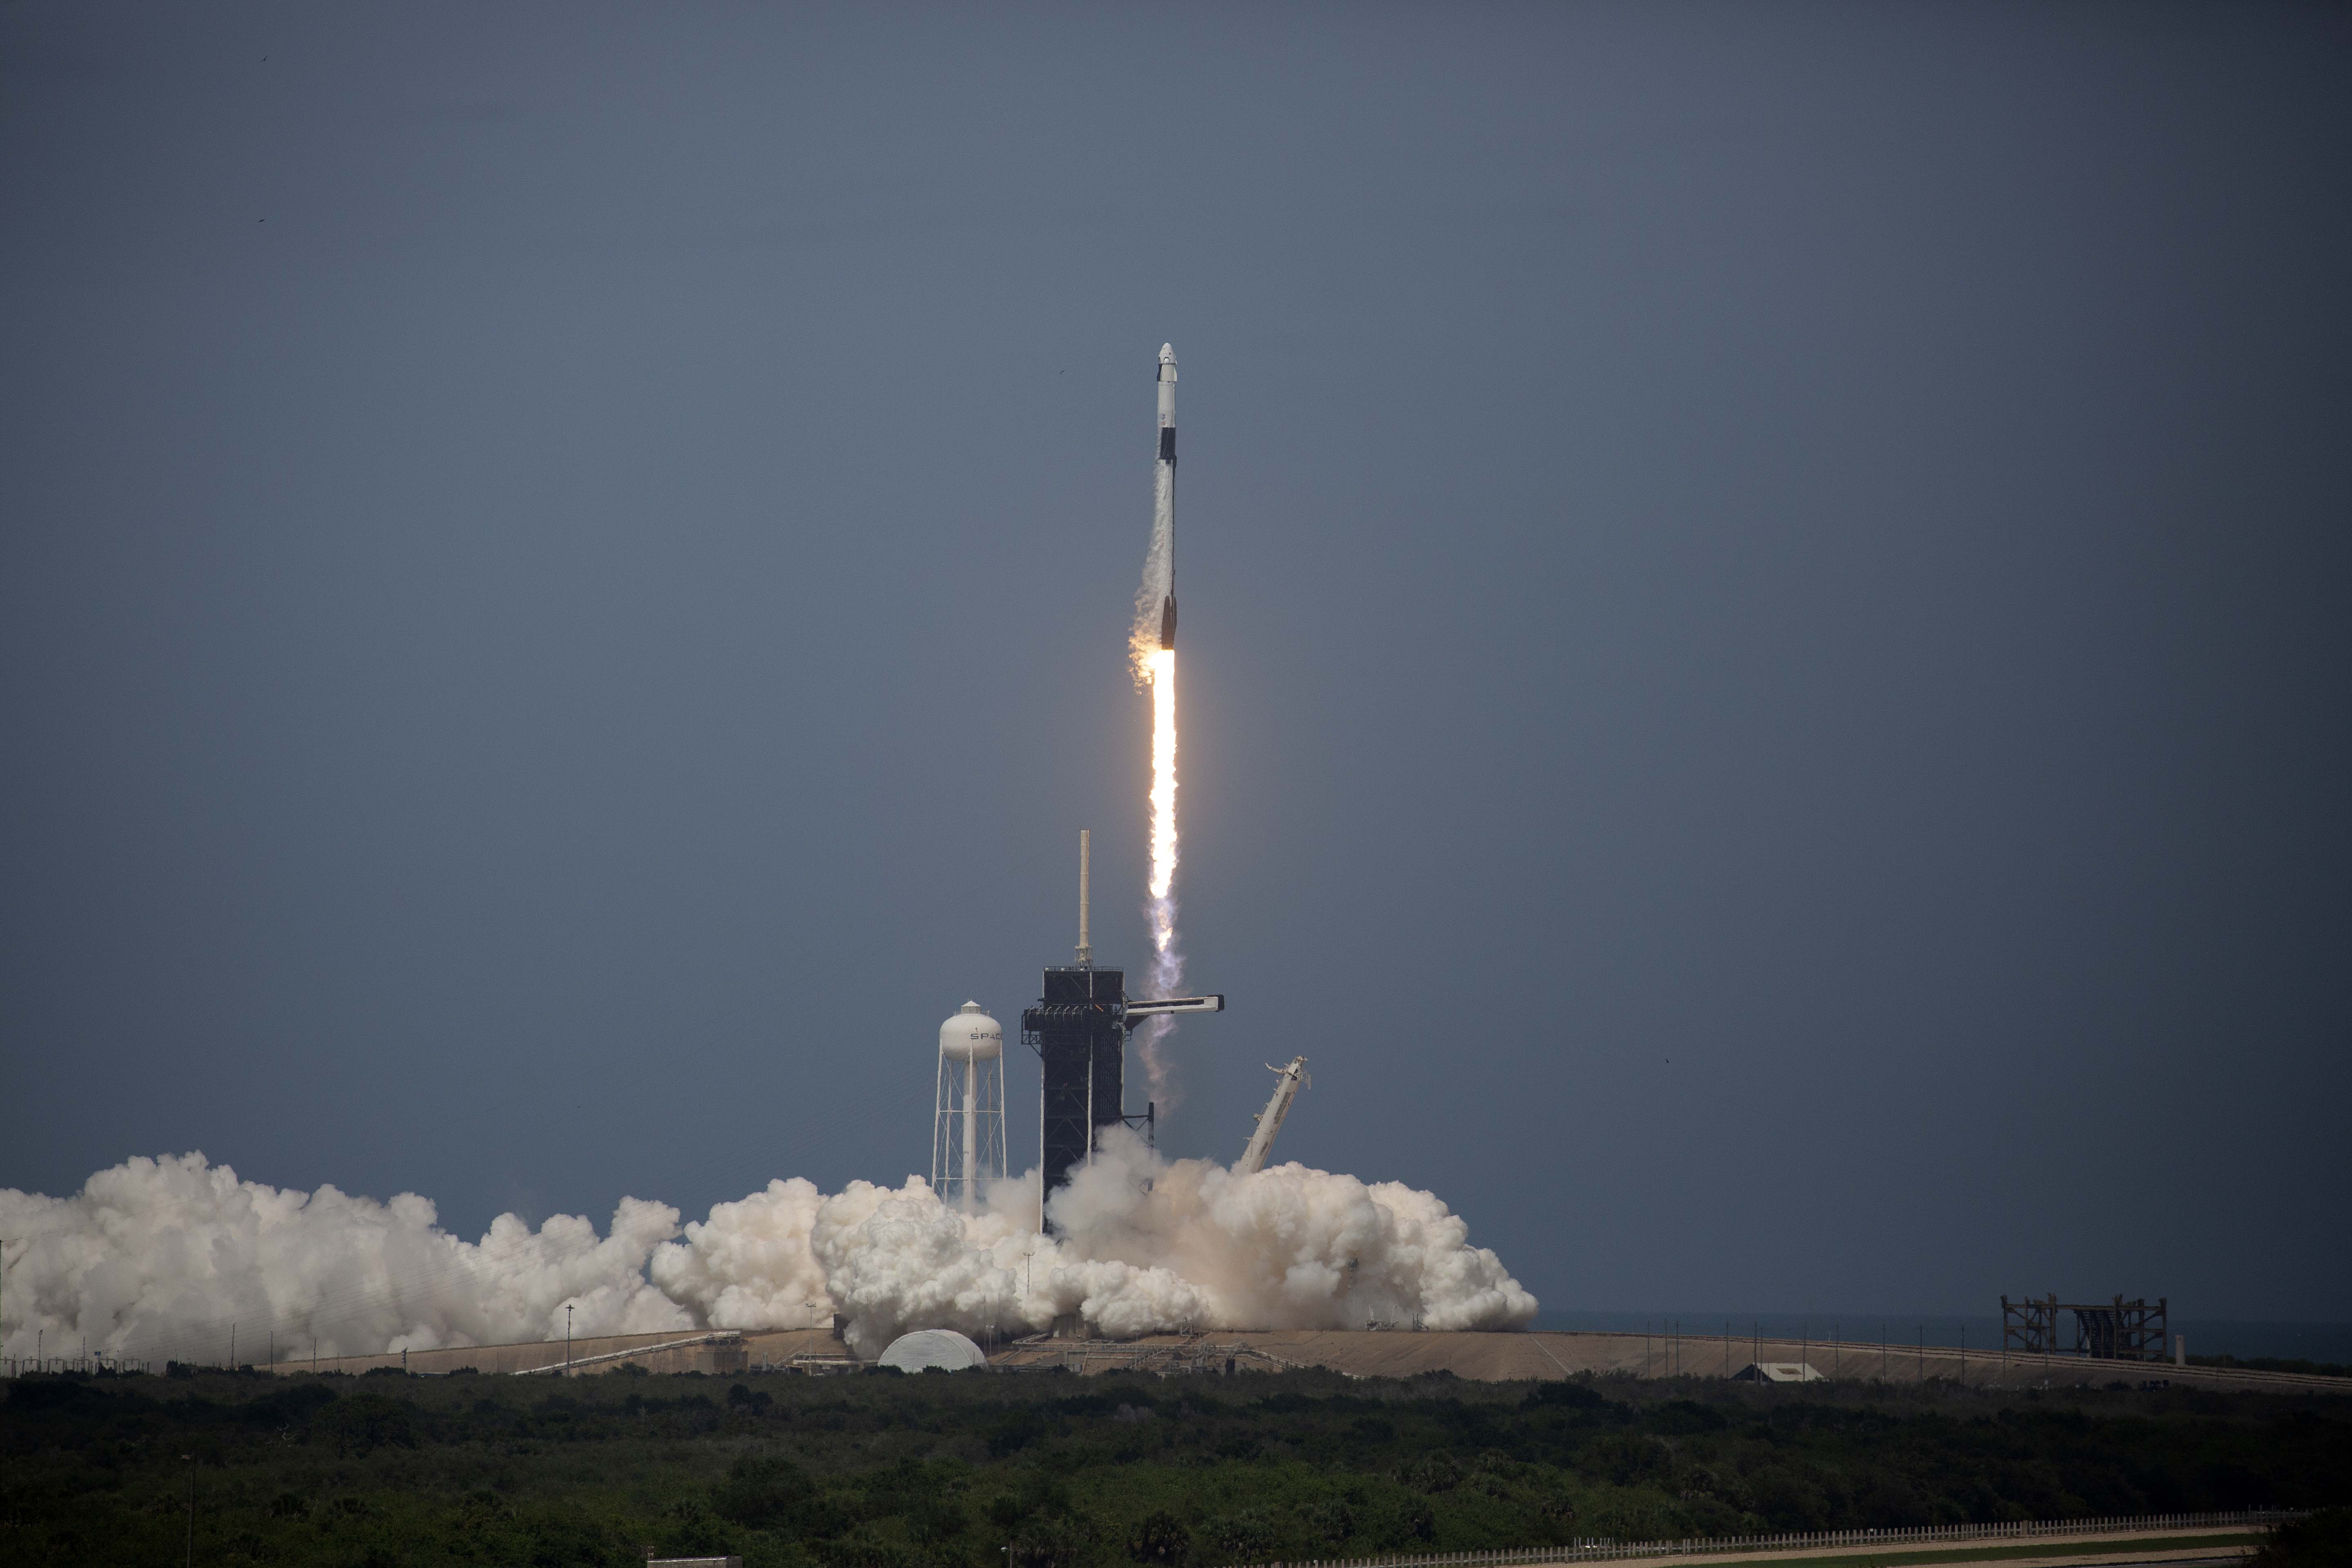 Spacex Falcon 9 Rocket And Crew Dragon Capsule Launches From Cape Canaveral Sending Astronauts To The International Space Station